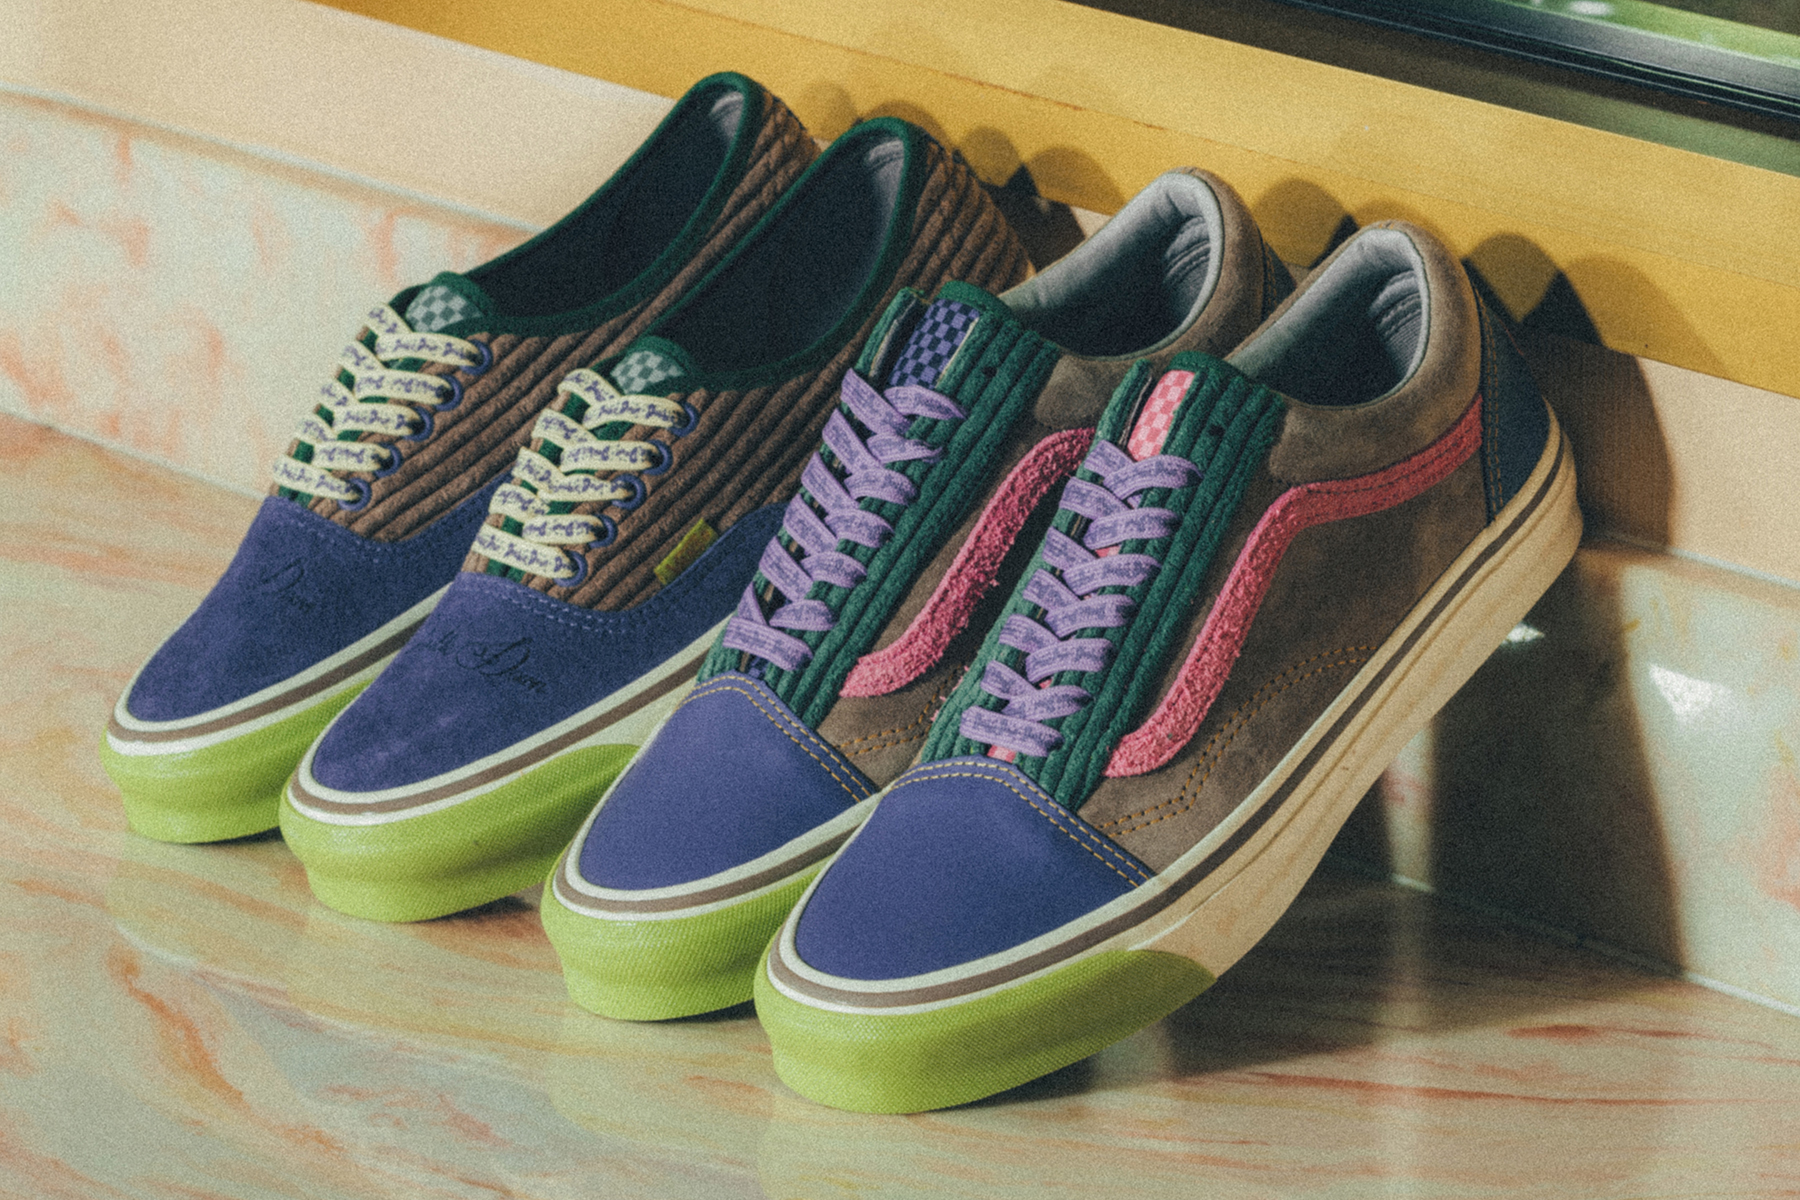 Feature & Vans Vault Head to Sin City With Their Collaborative “Double Down Sinner’s Club” Range